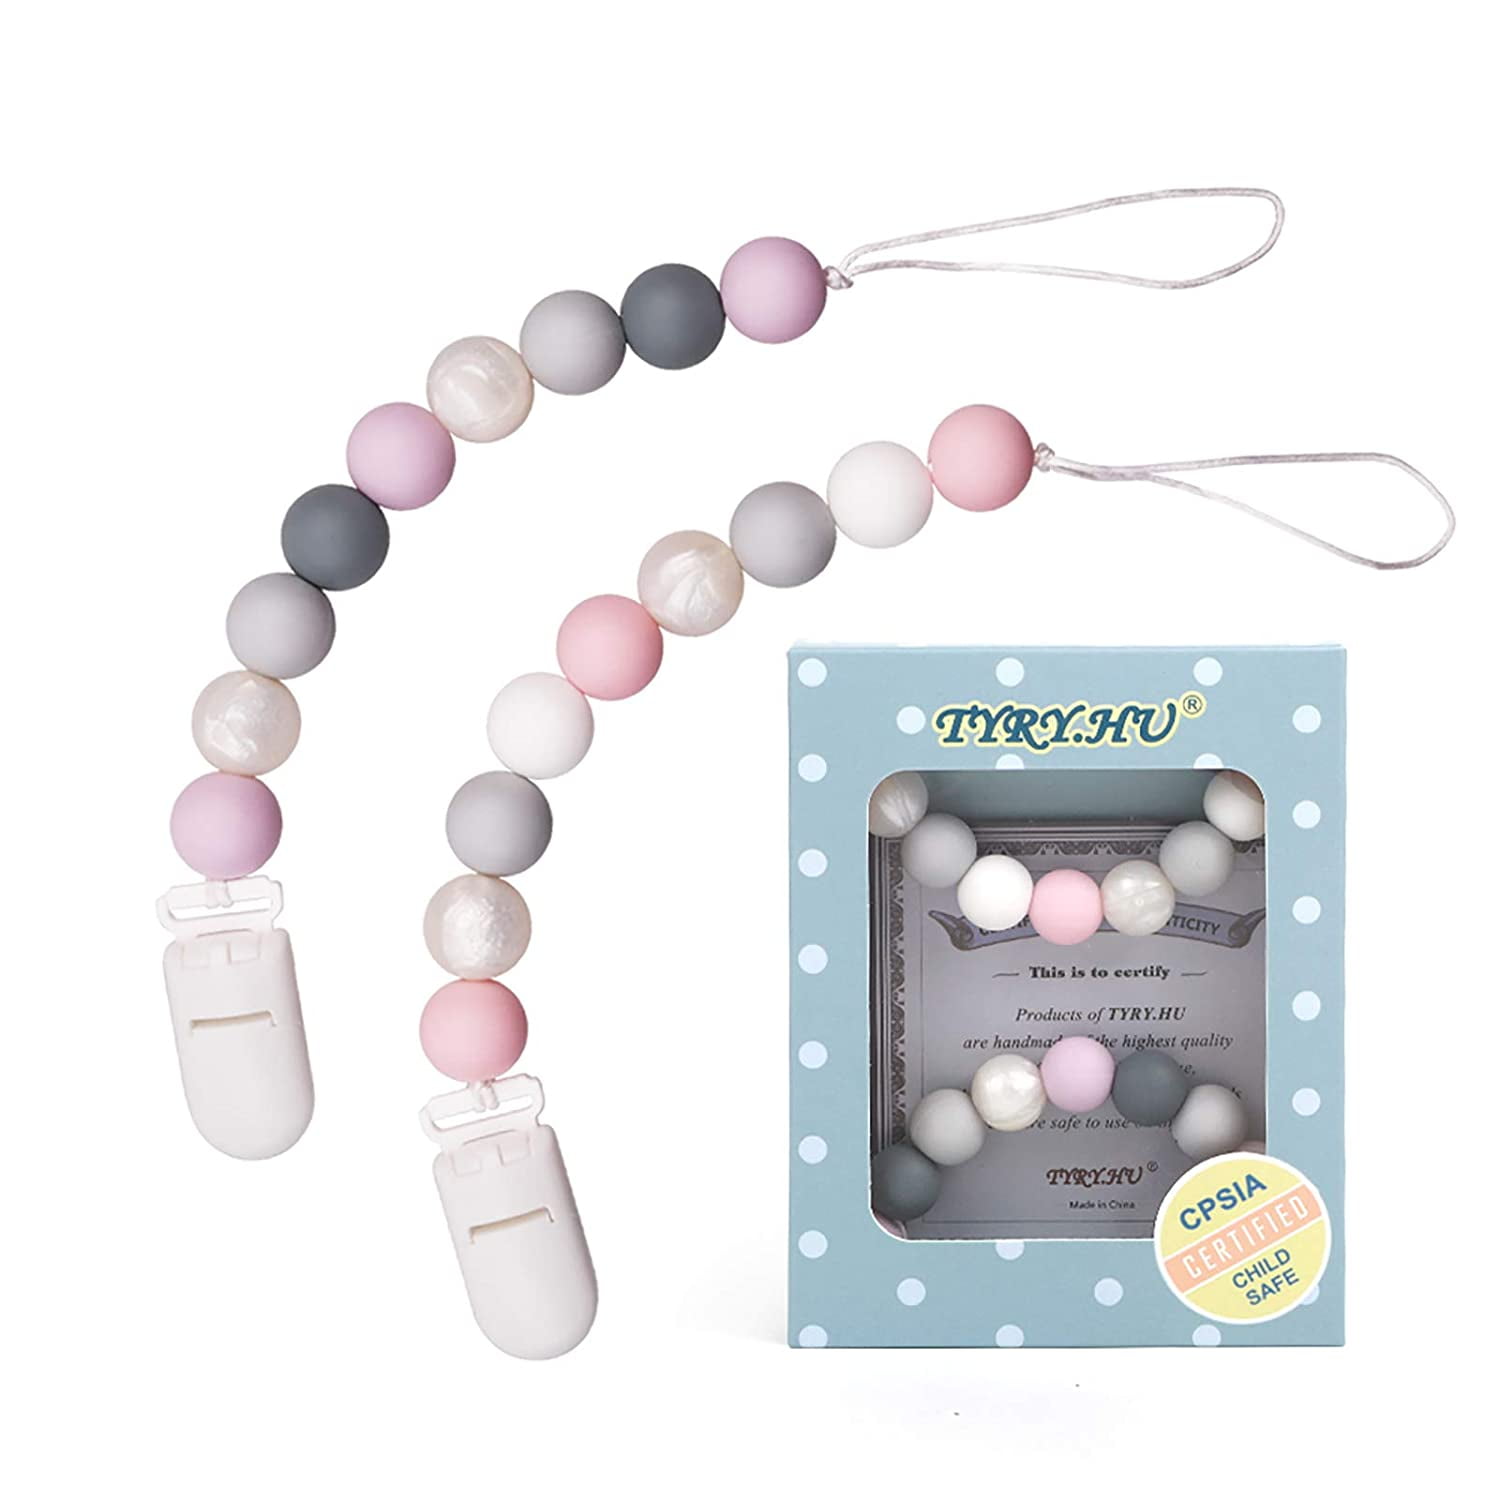 Star MORIBOX Silicone Teething Beads Paci Clip Leash Modern Universal Baby Binky Holder Soothie Teethers Toys for Shower Gift 2 Pack Pacifier Clips for Boys and Girls 